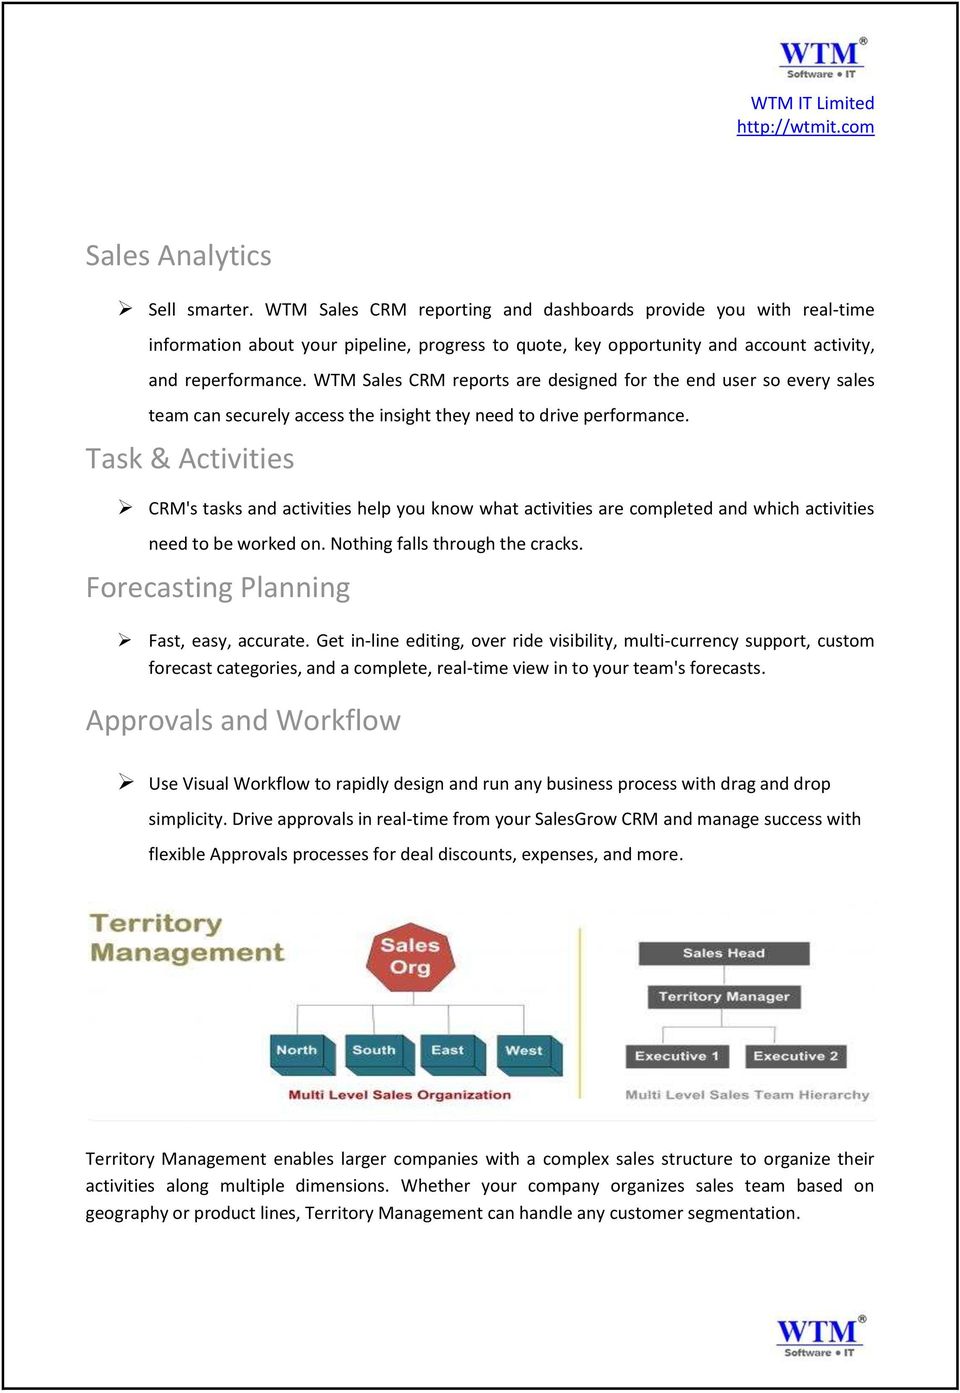 WTM Sales CRM reports are designed for the end user so every sales team can securely access the insight they need to drive performance.